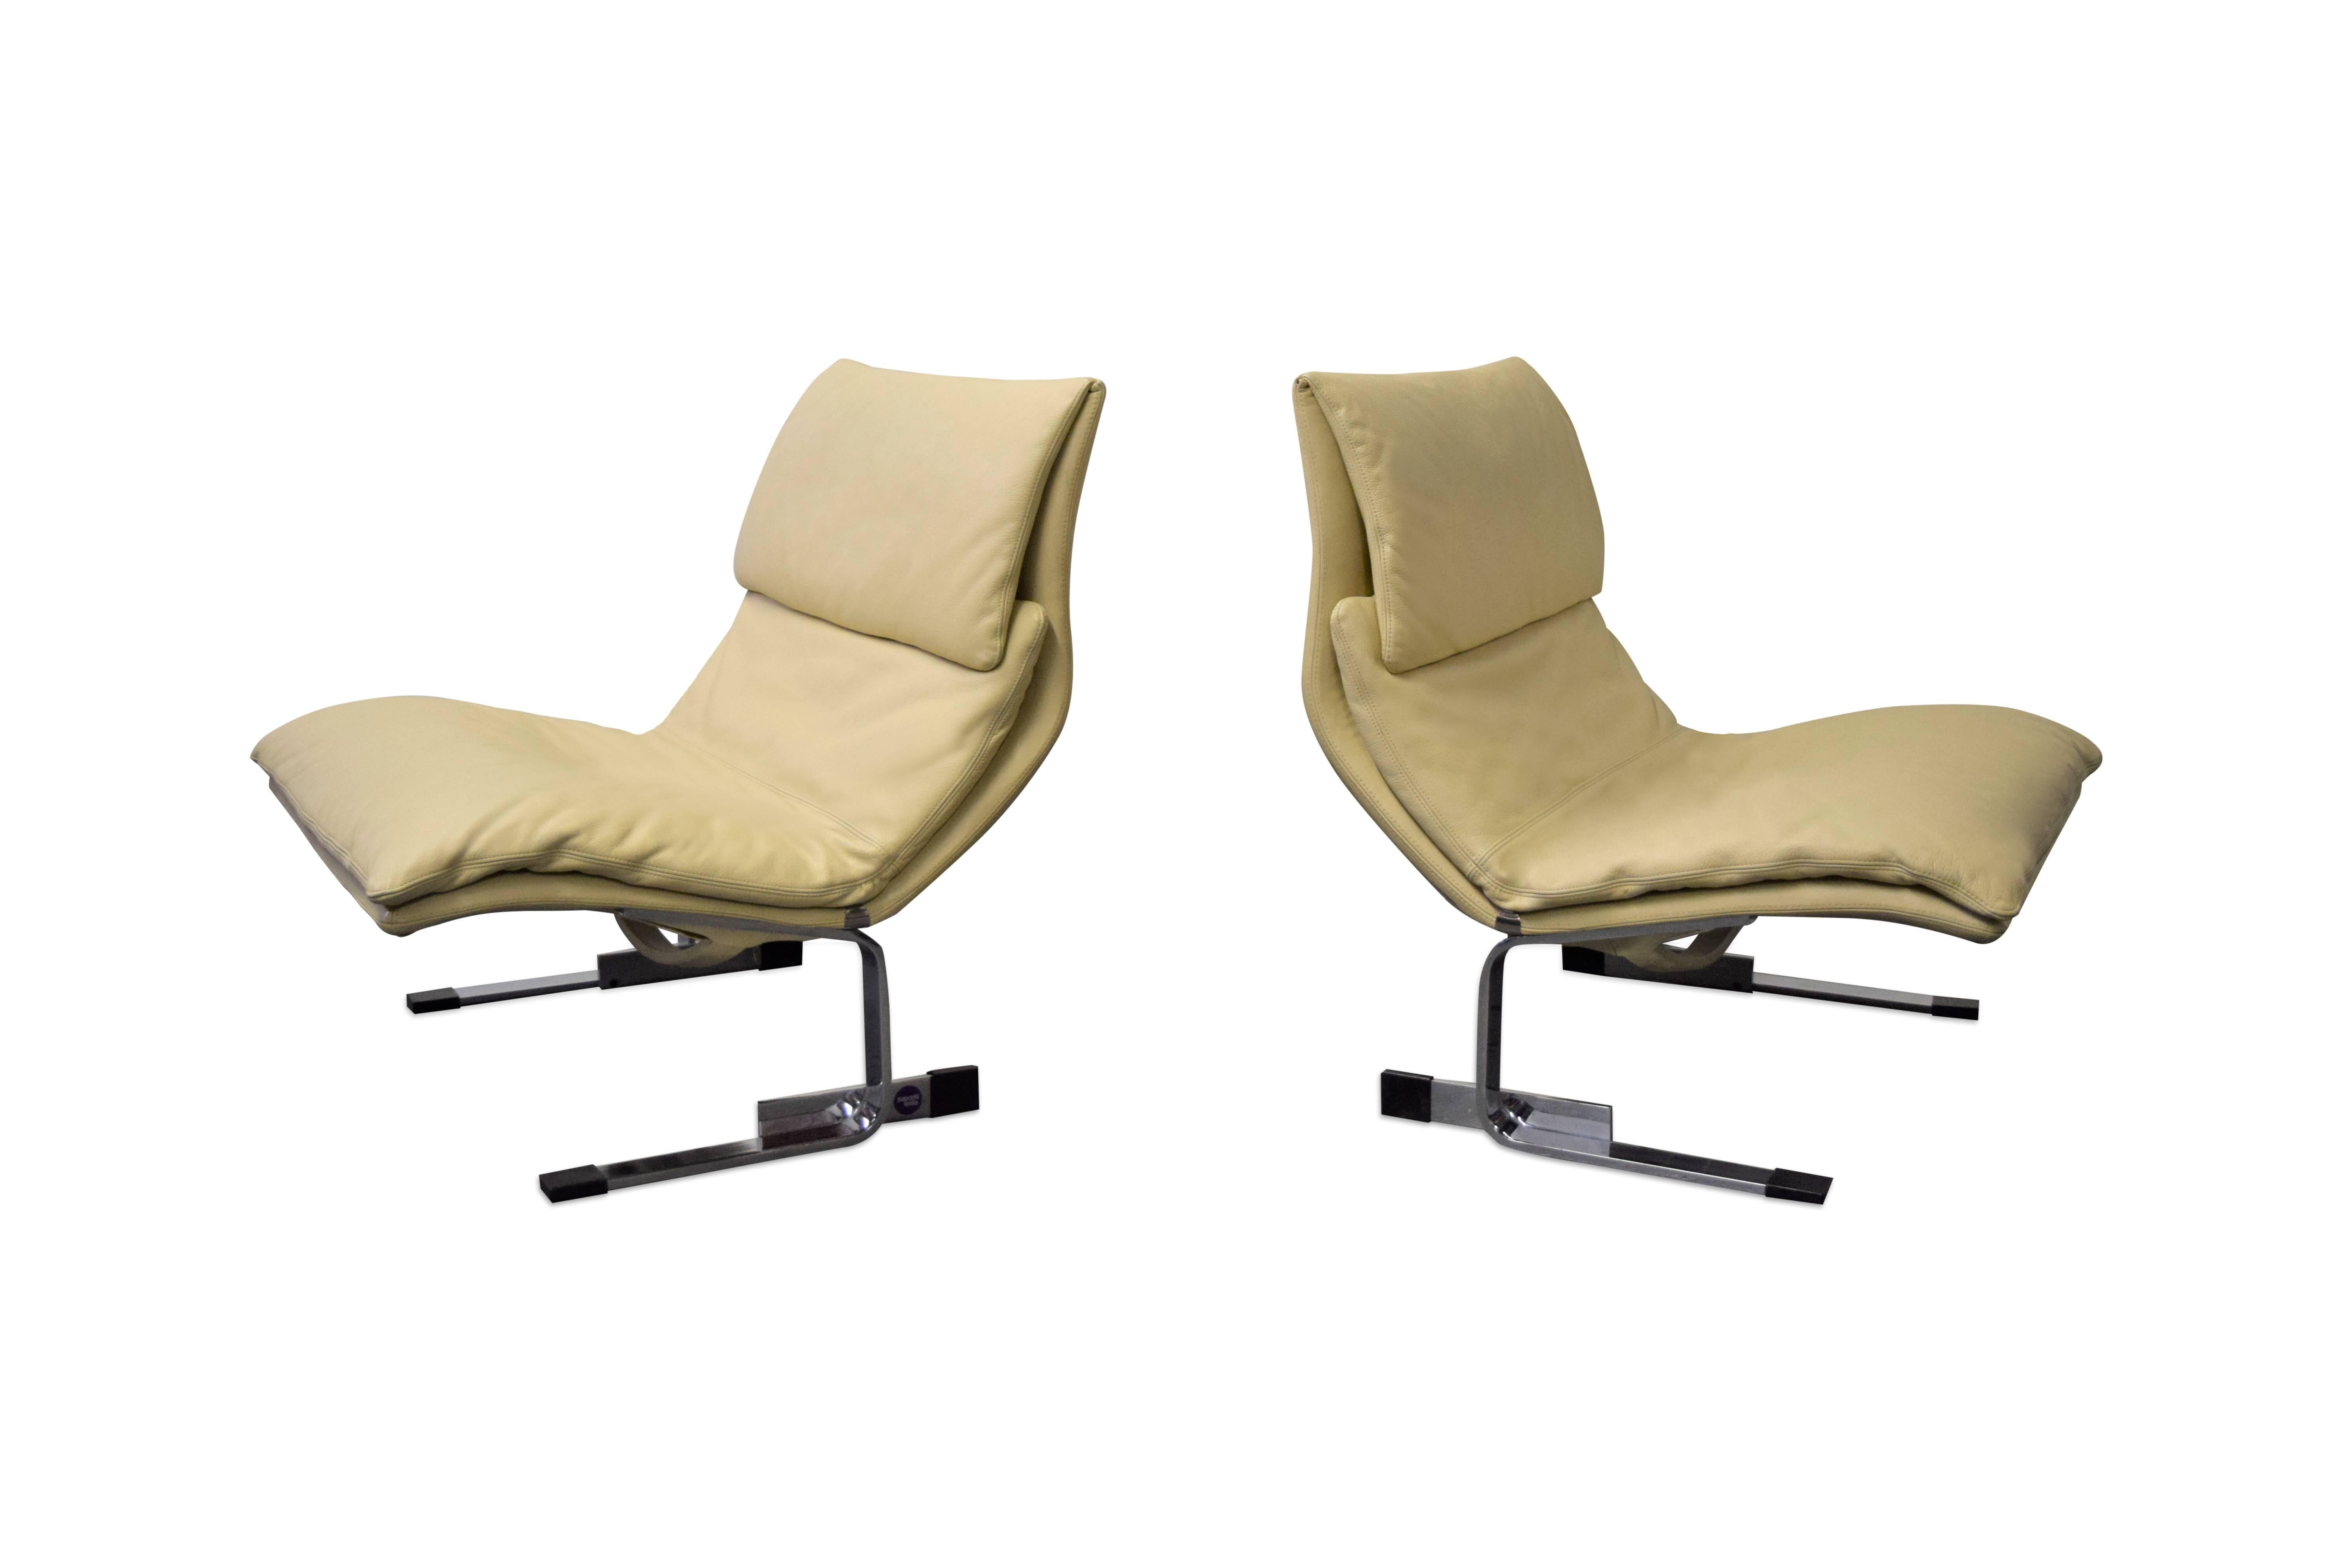 Pair of leather Saporiti 'Onda' wave lounge chairs. Base is signed.